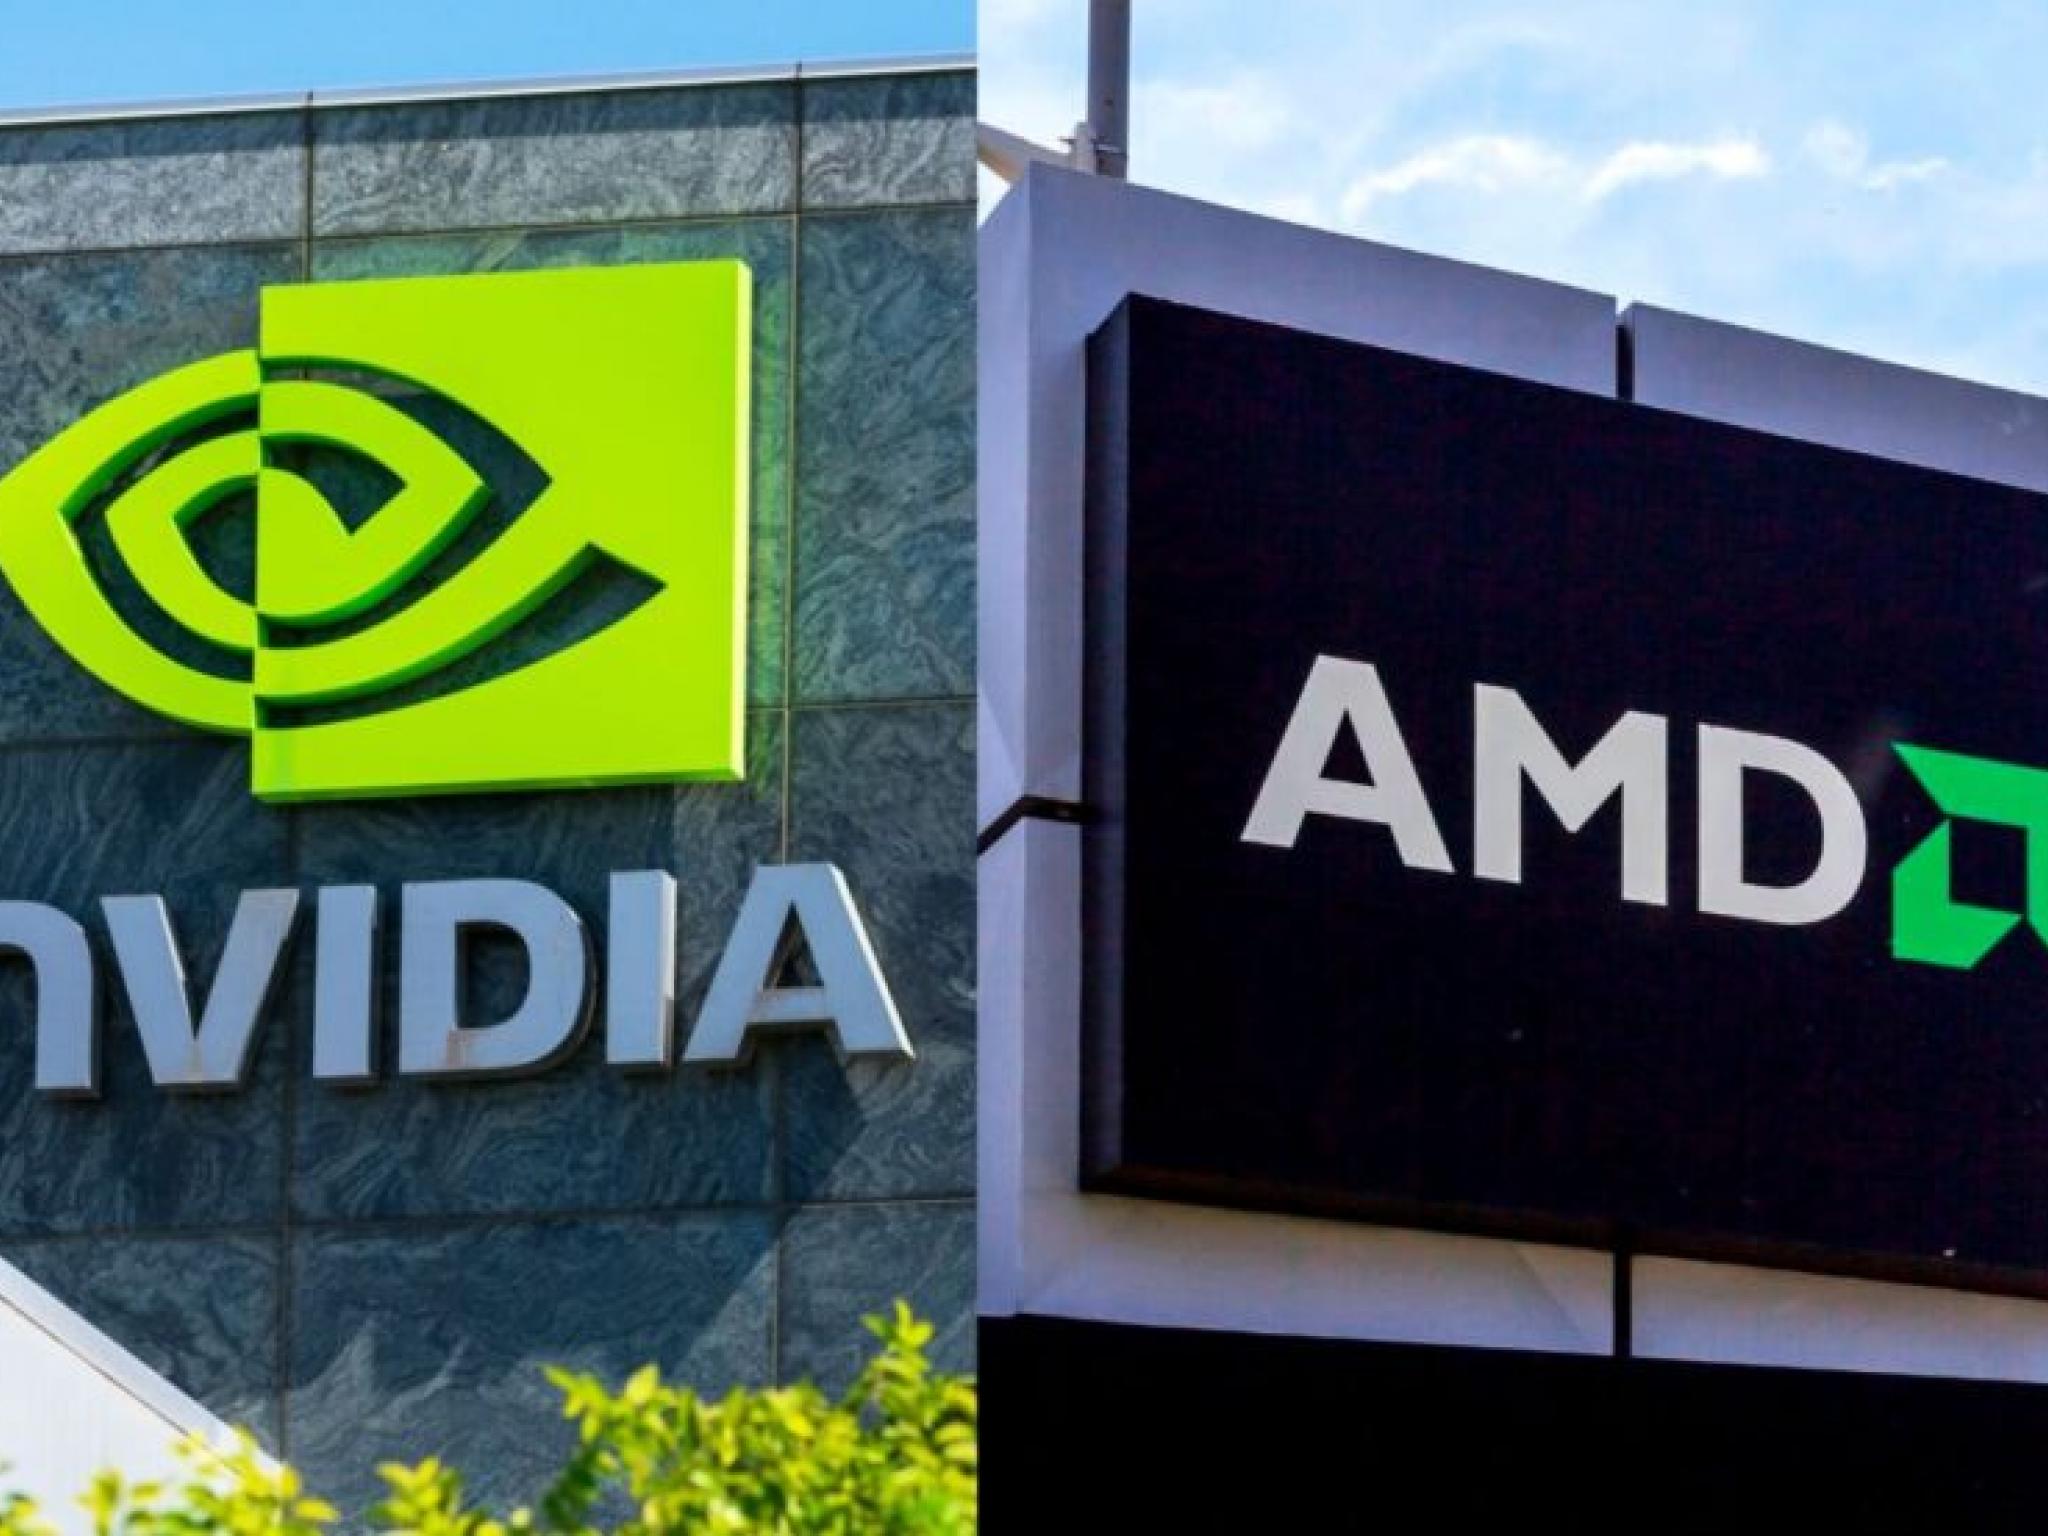 What’s Going On With Key AI Stocks AMD, Intel, Nvidia On Friday?